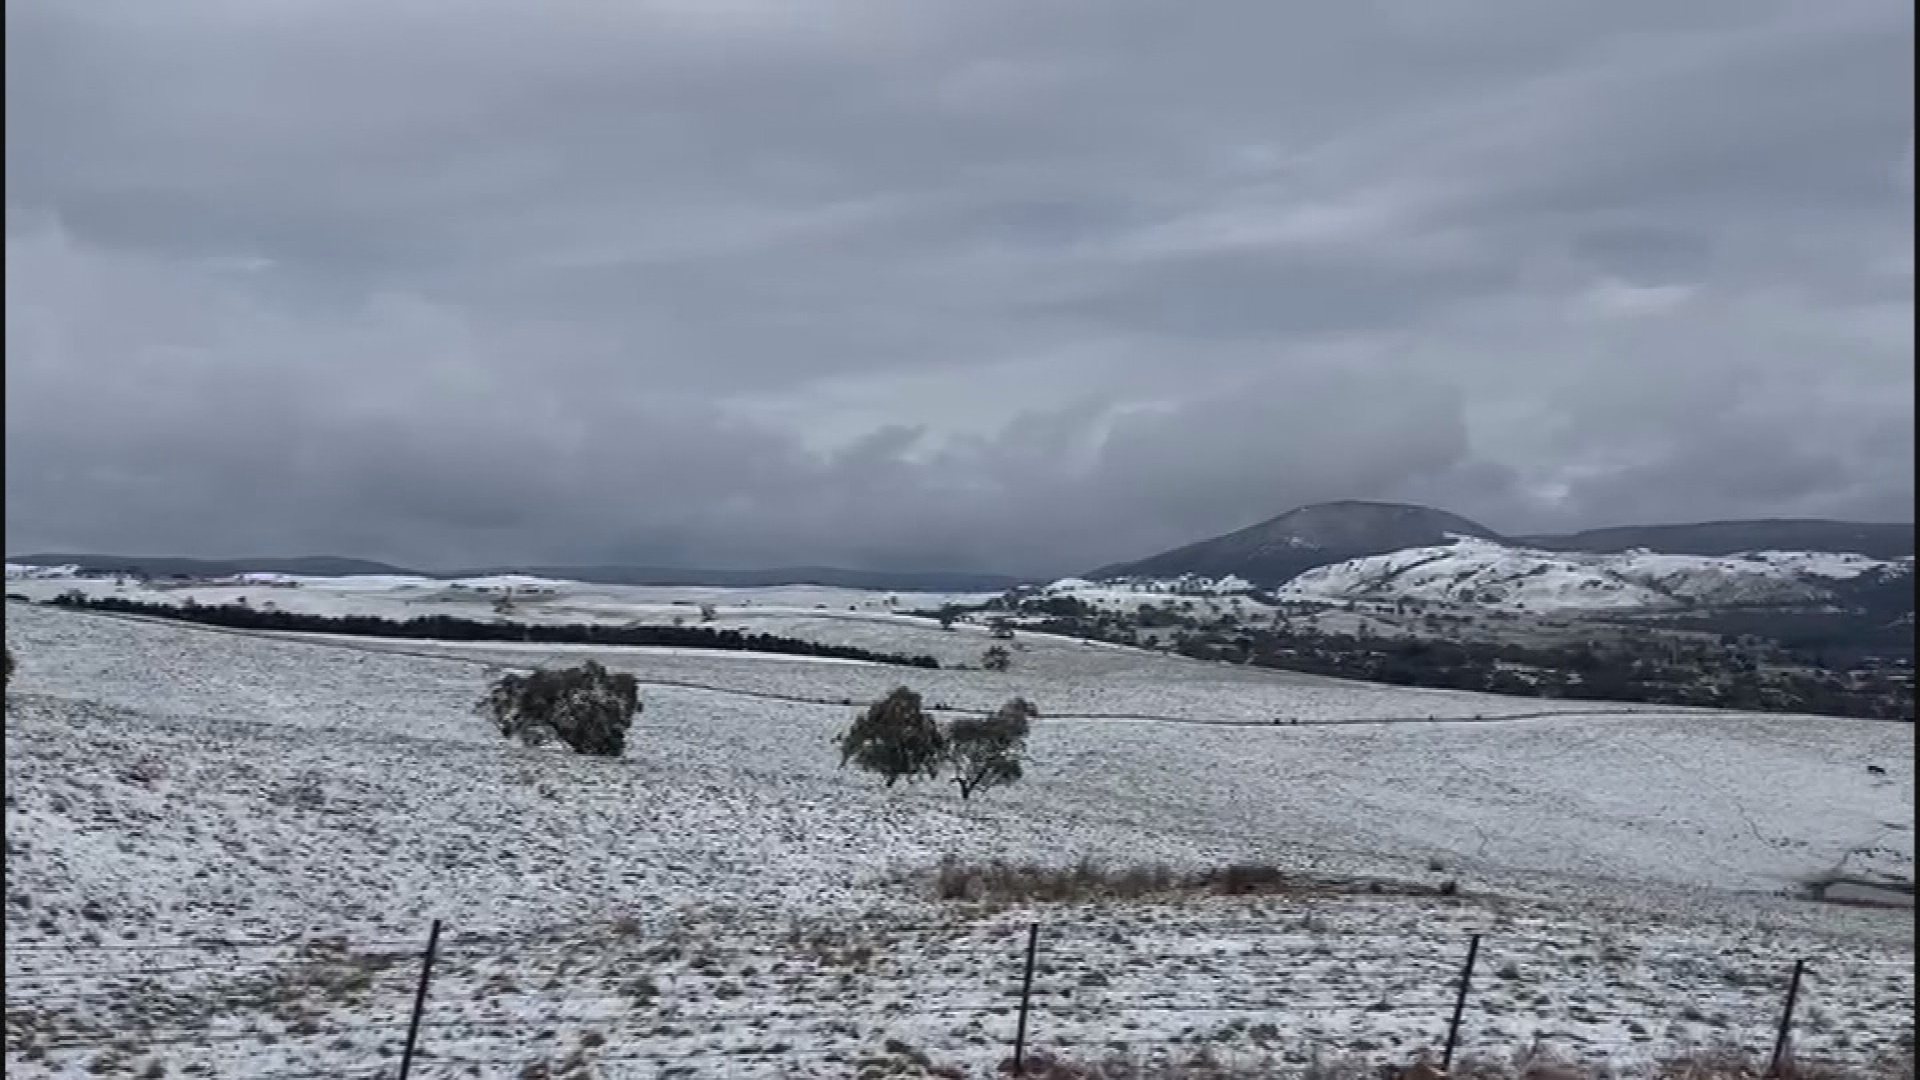 Snow in regional Victoria on Tuesday August 23.